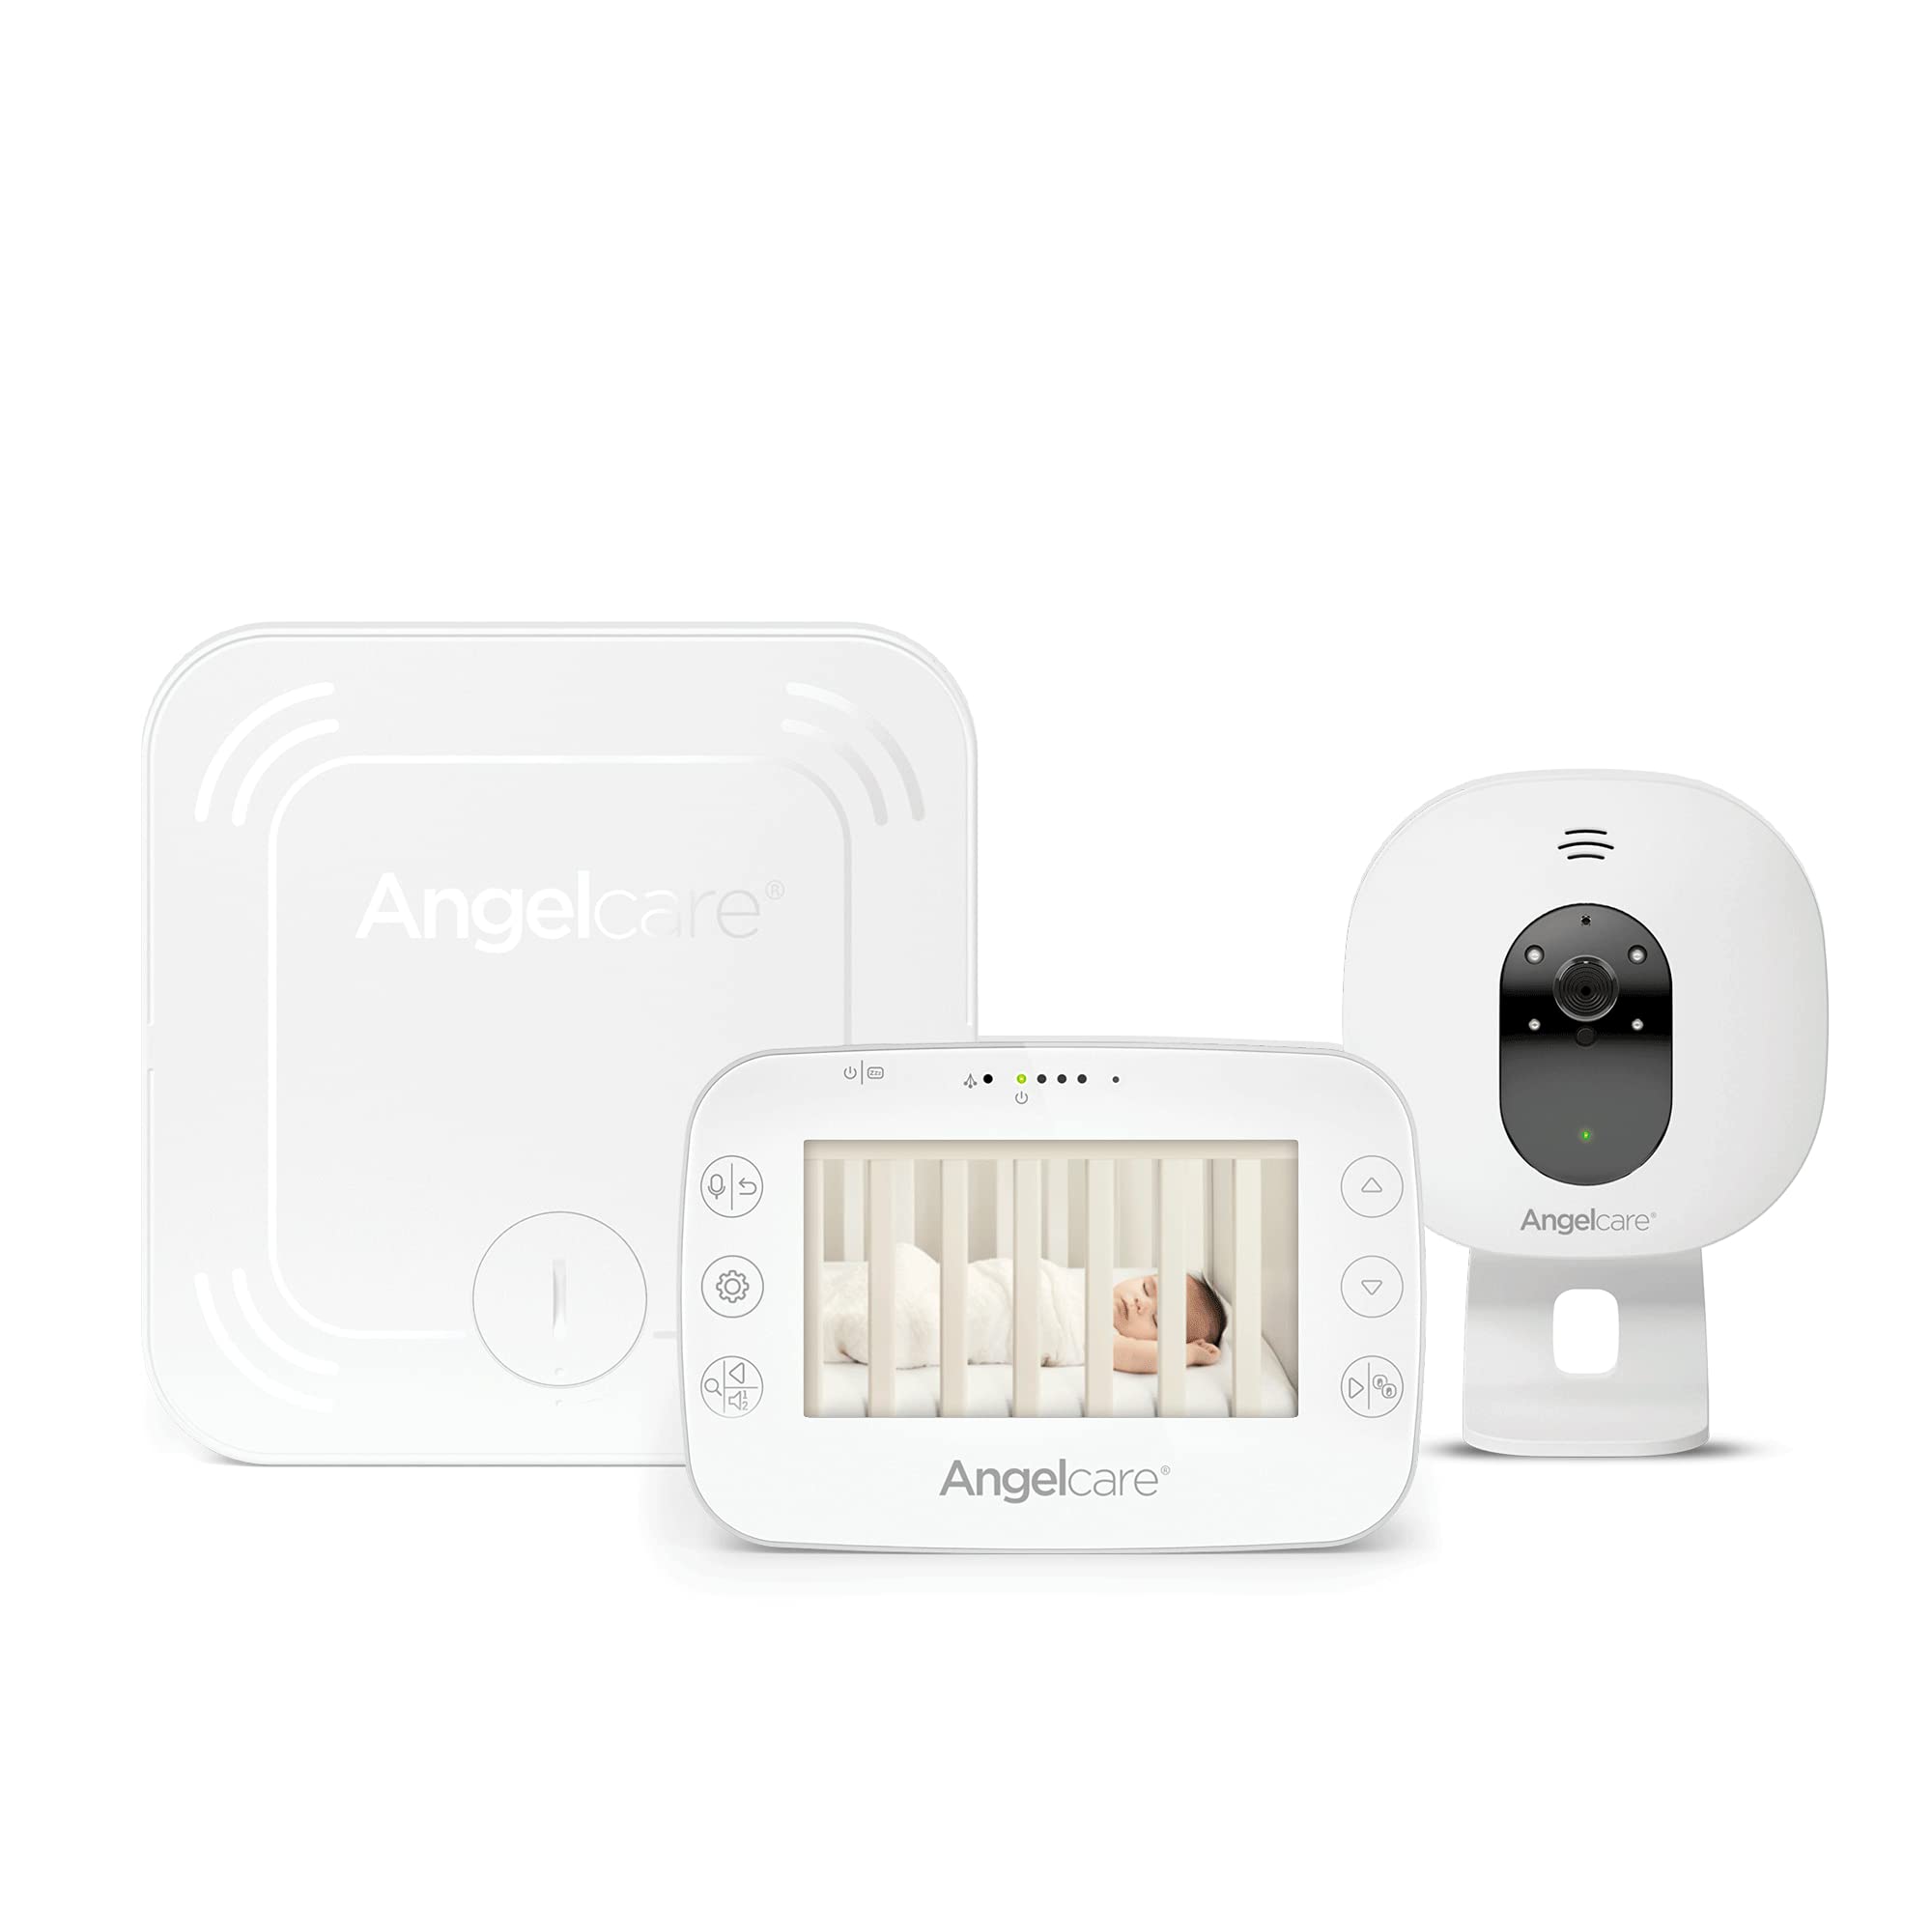 Angelcare Ac327 3-in-1 Baby Movement Monitor with Video, White